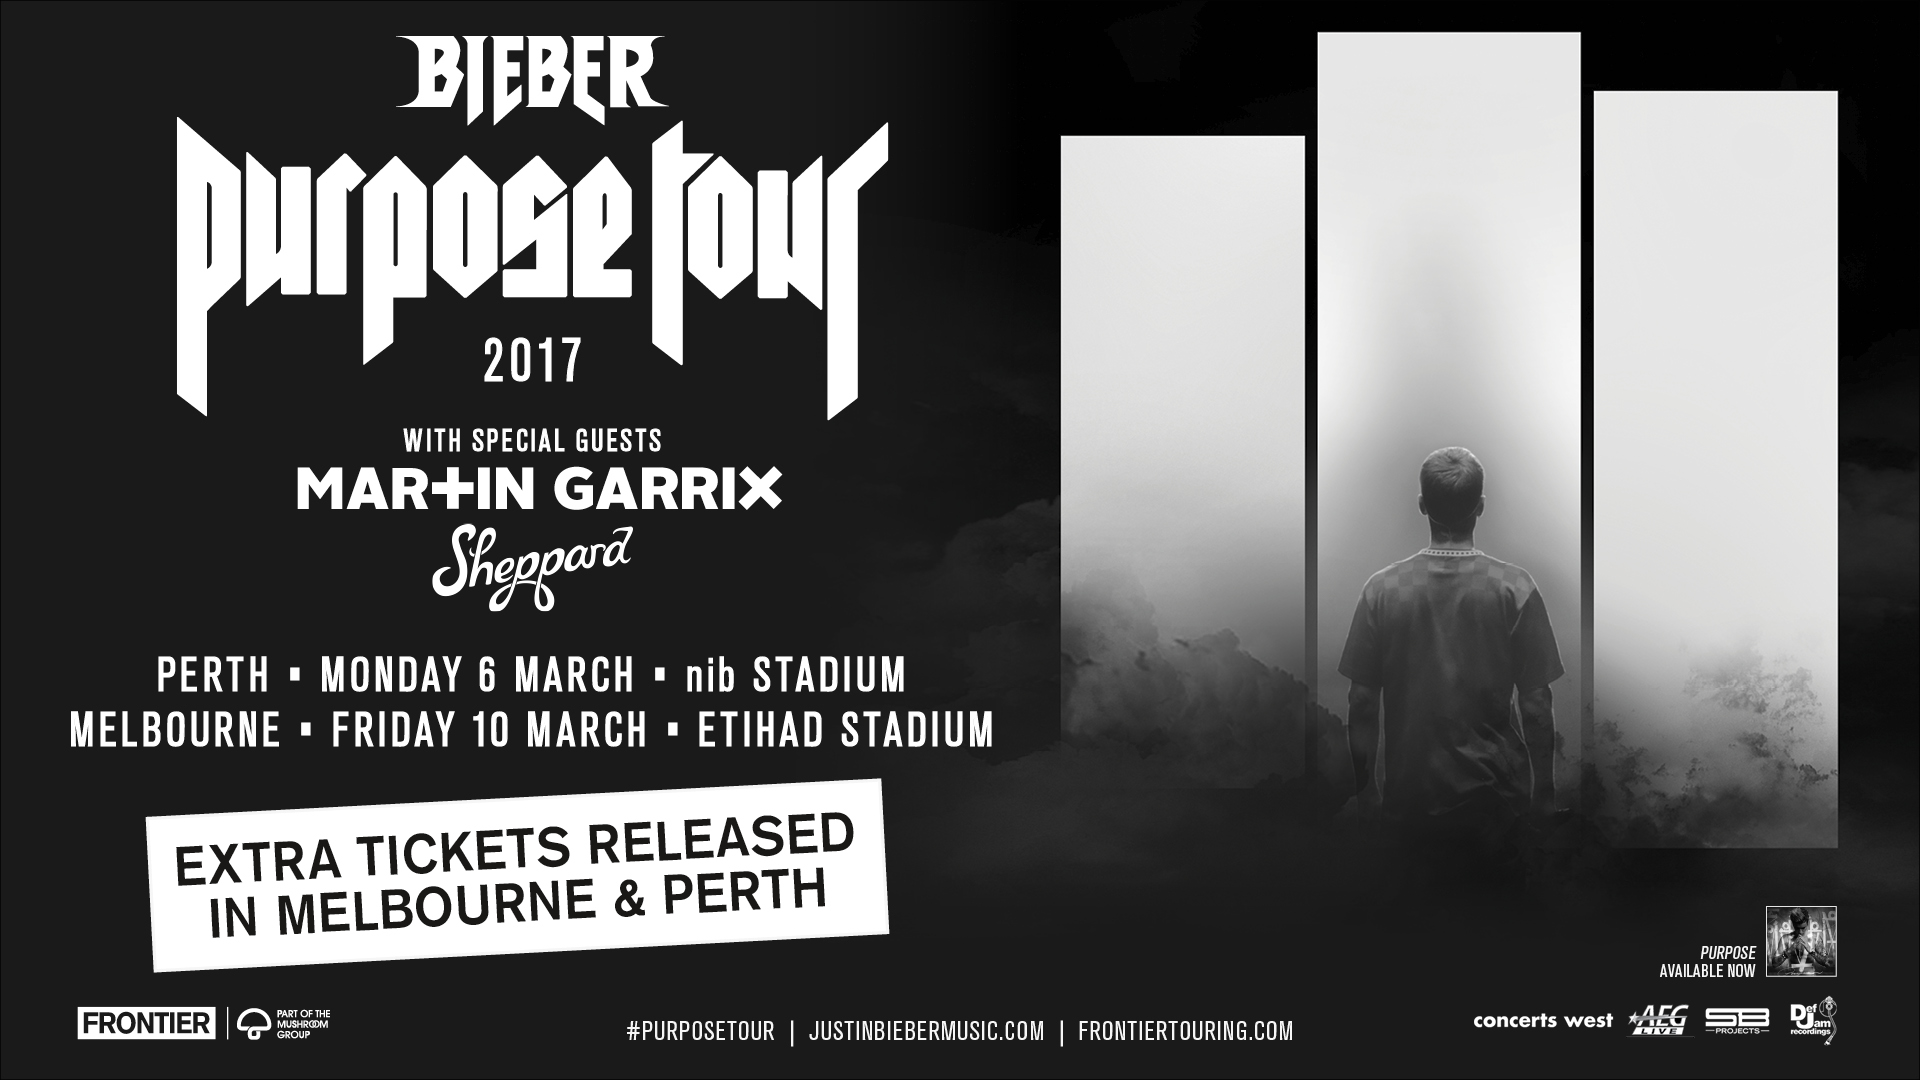 justin bieber | extra tickets released to perth & melbourne shows – 10 days until purpose tour begins!